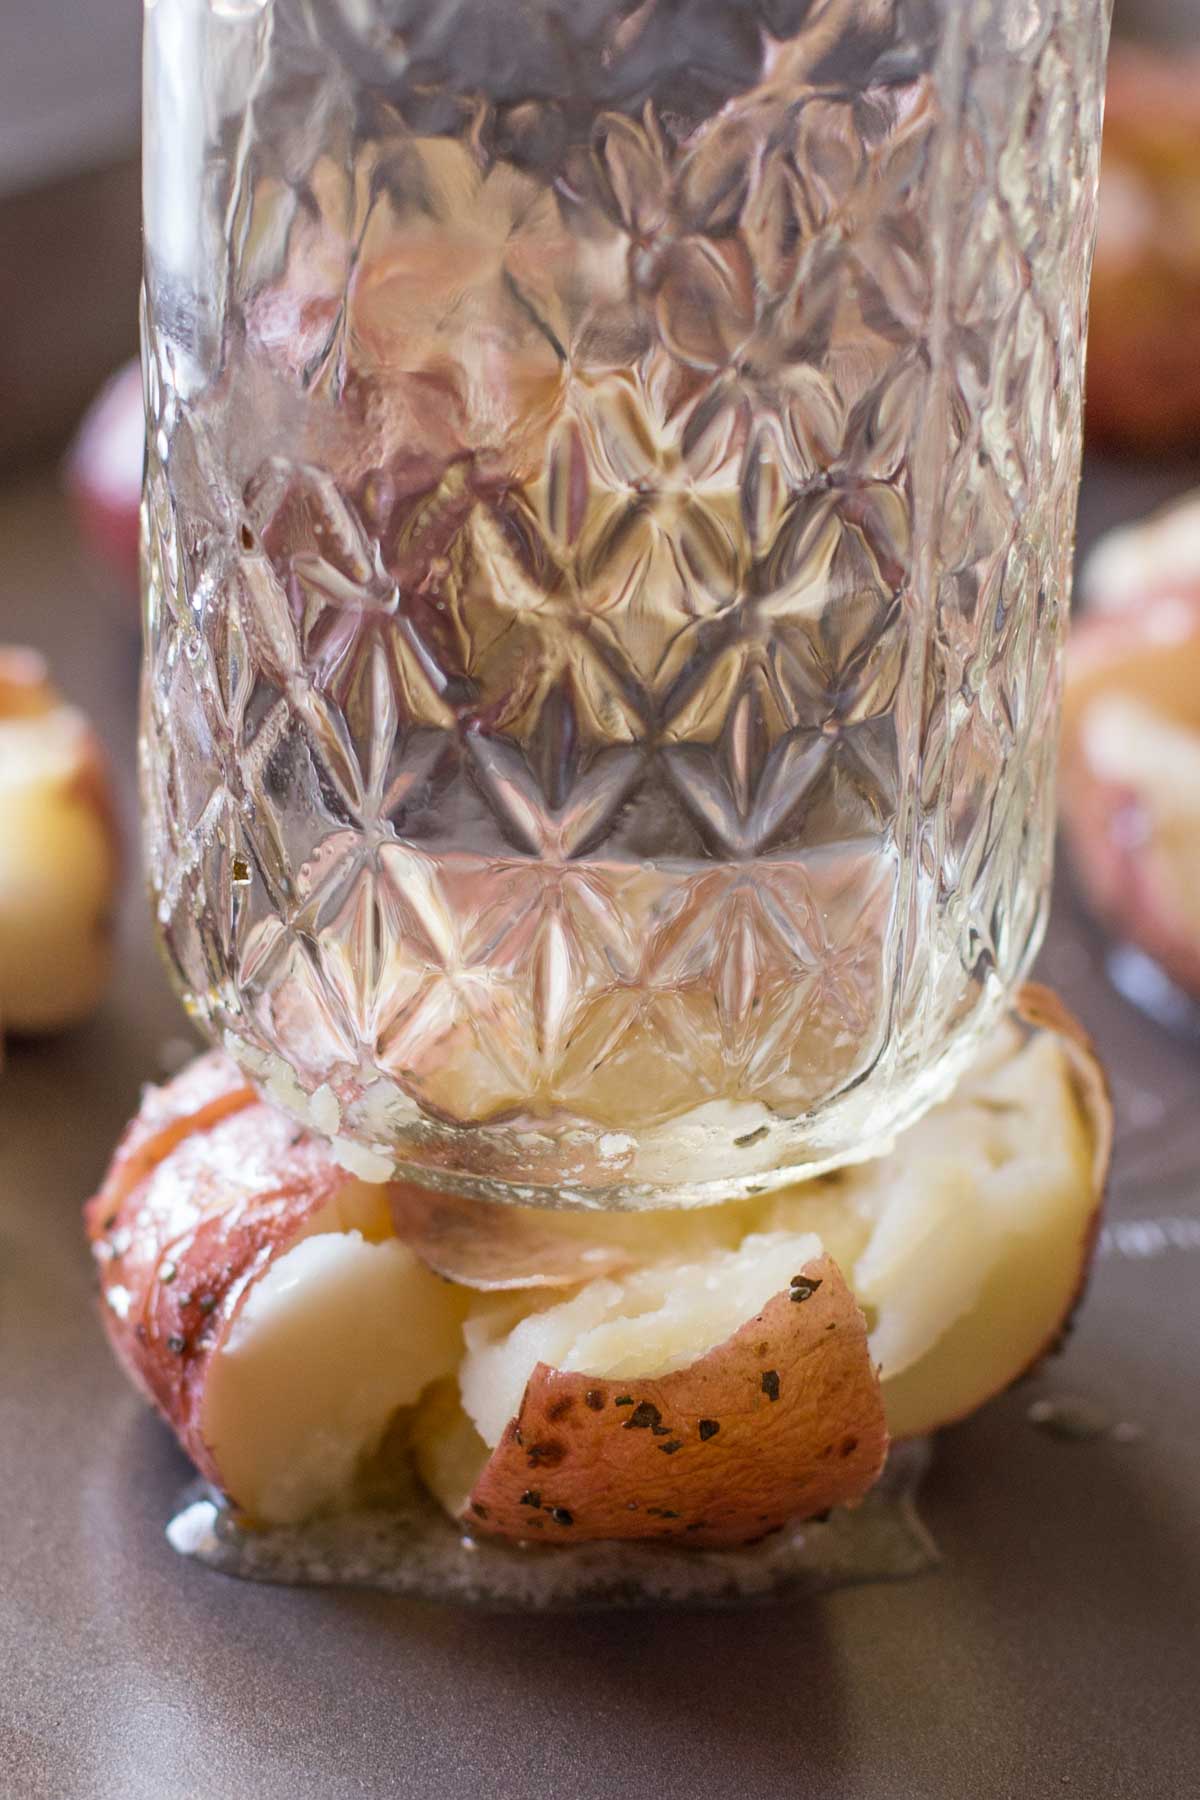 A bottom of a glass being used to smash the roasted potato.  